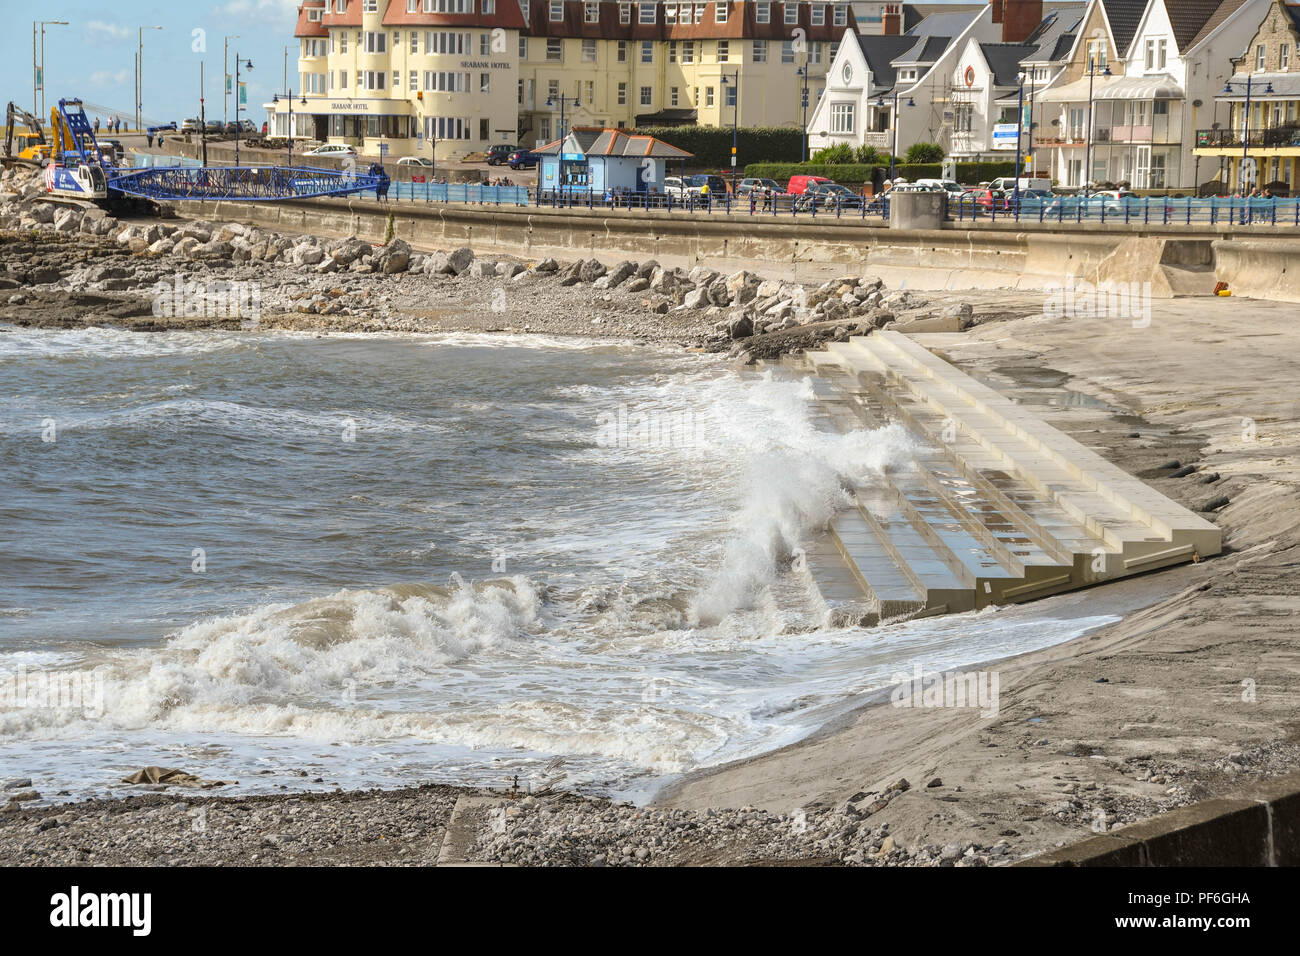 Incoming tide with waves on the seafront in Porthcawl. Wales. The concrete steps are part of improvement works to protect it from the sea. Stock Photo